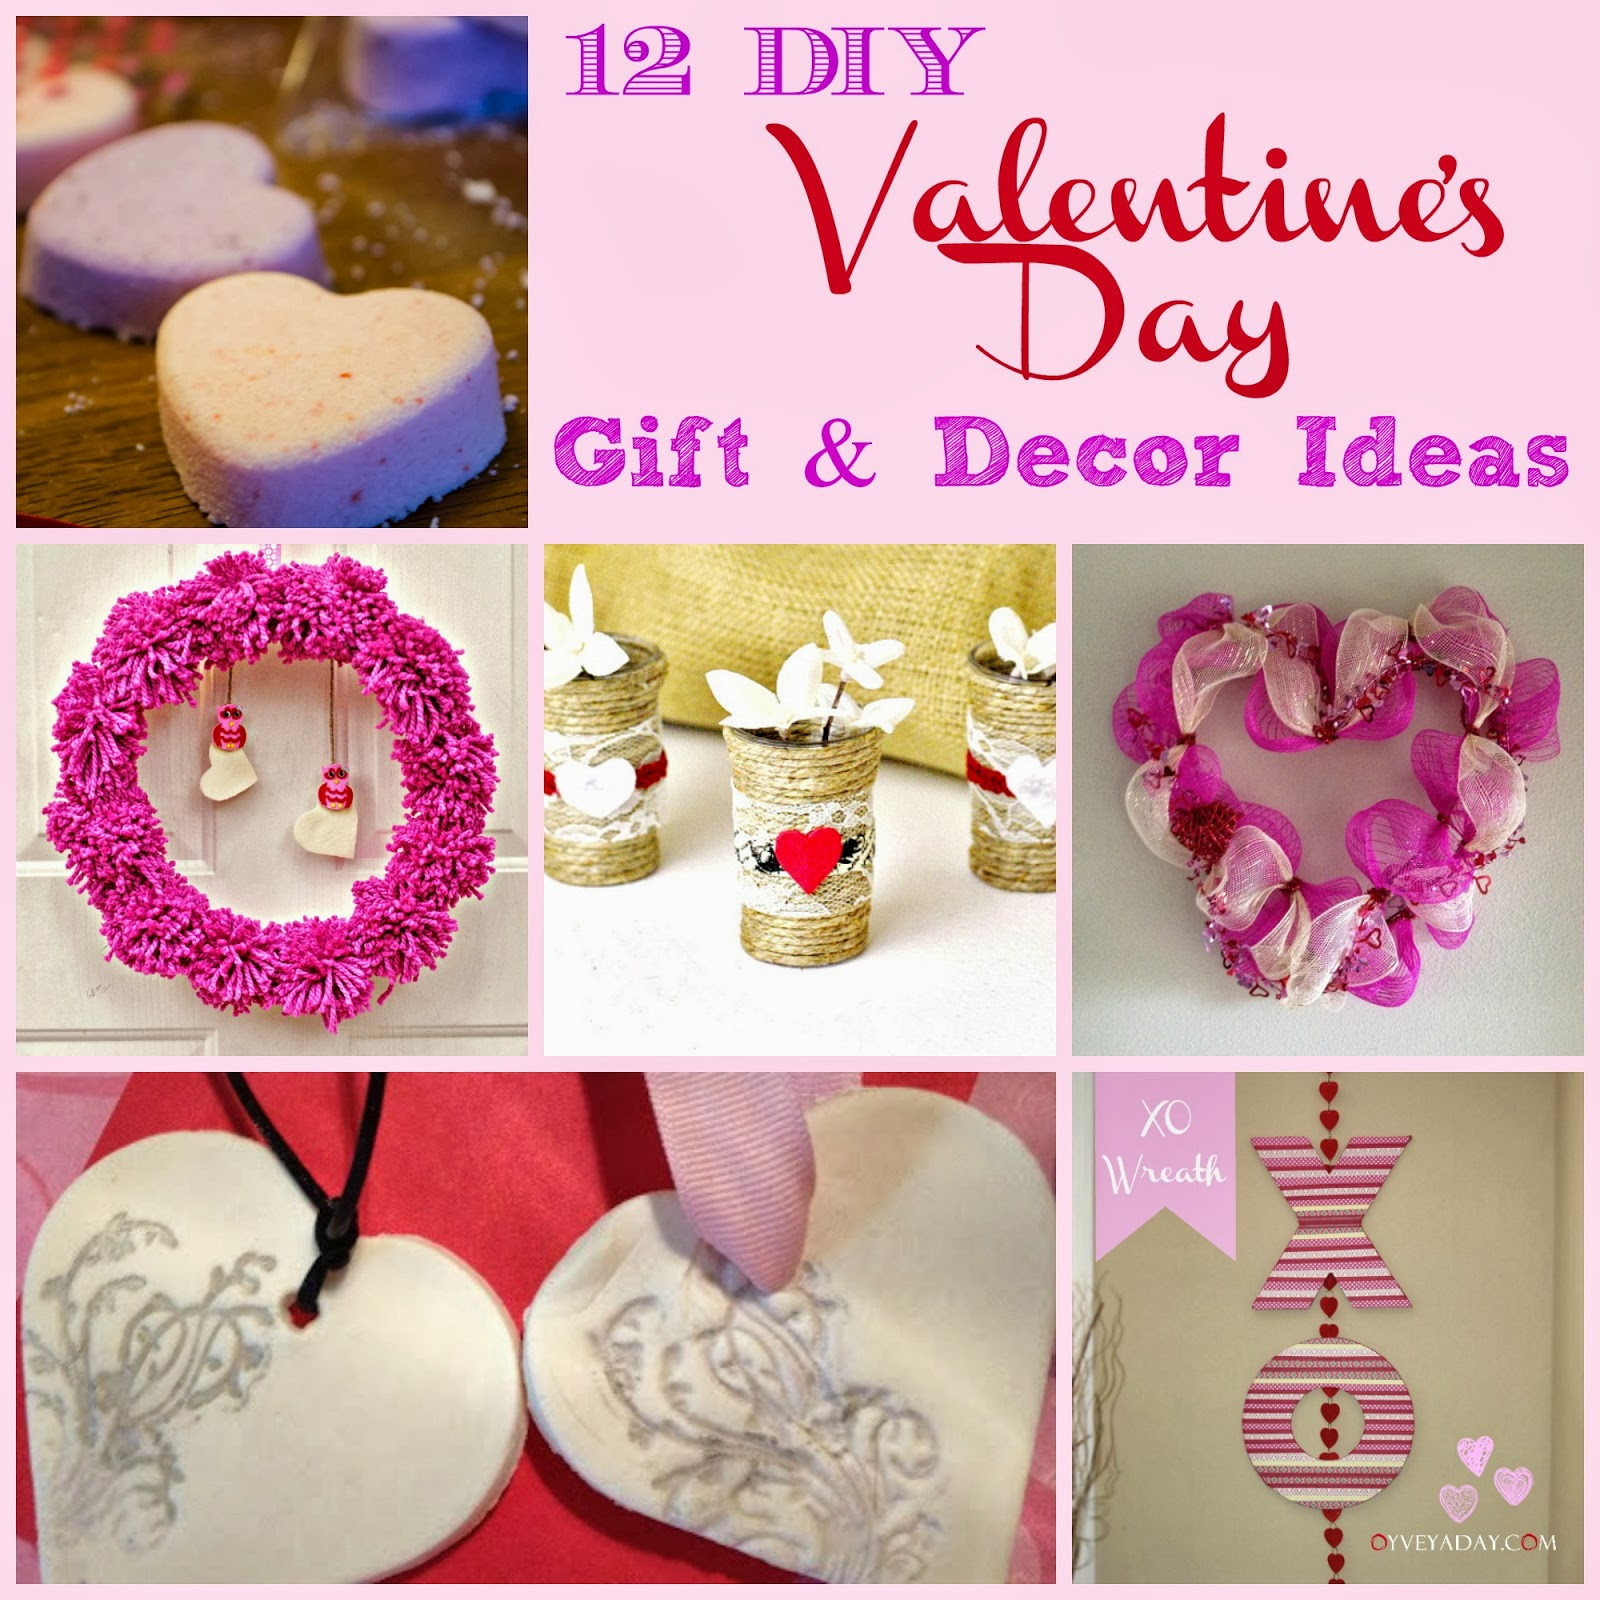 Diy Valentine'S Day Gift Ideas
 12 DIY Valentine s Day Gift & Decor Ideas Outnumbered 3 to 1